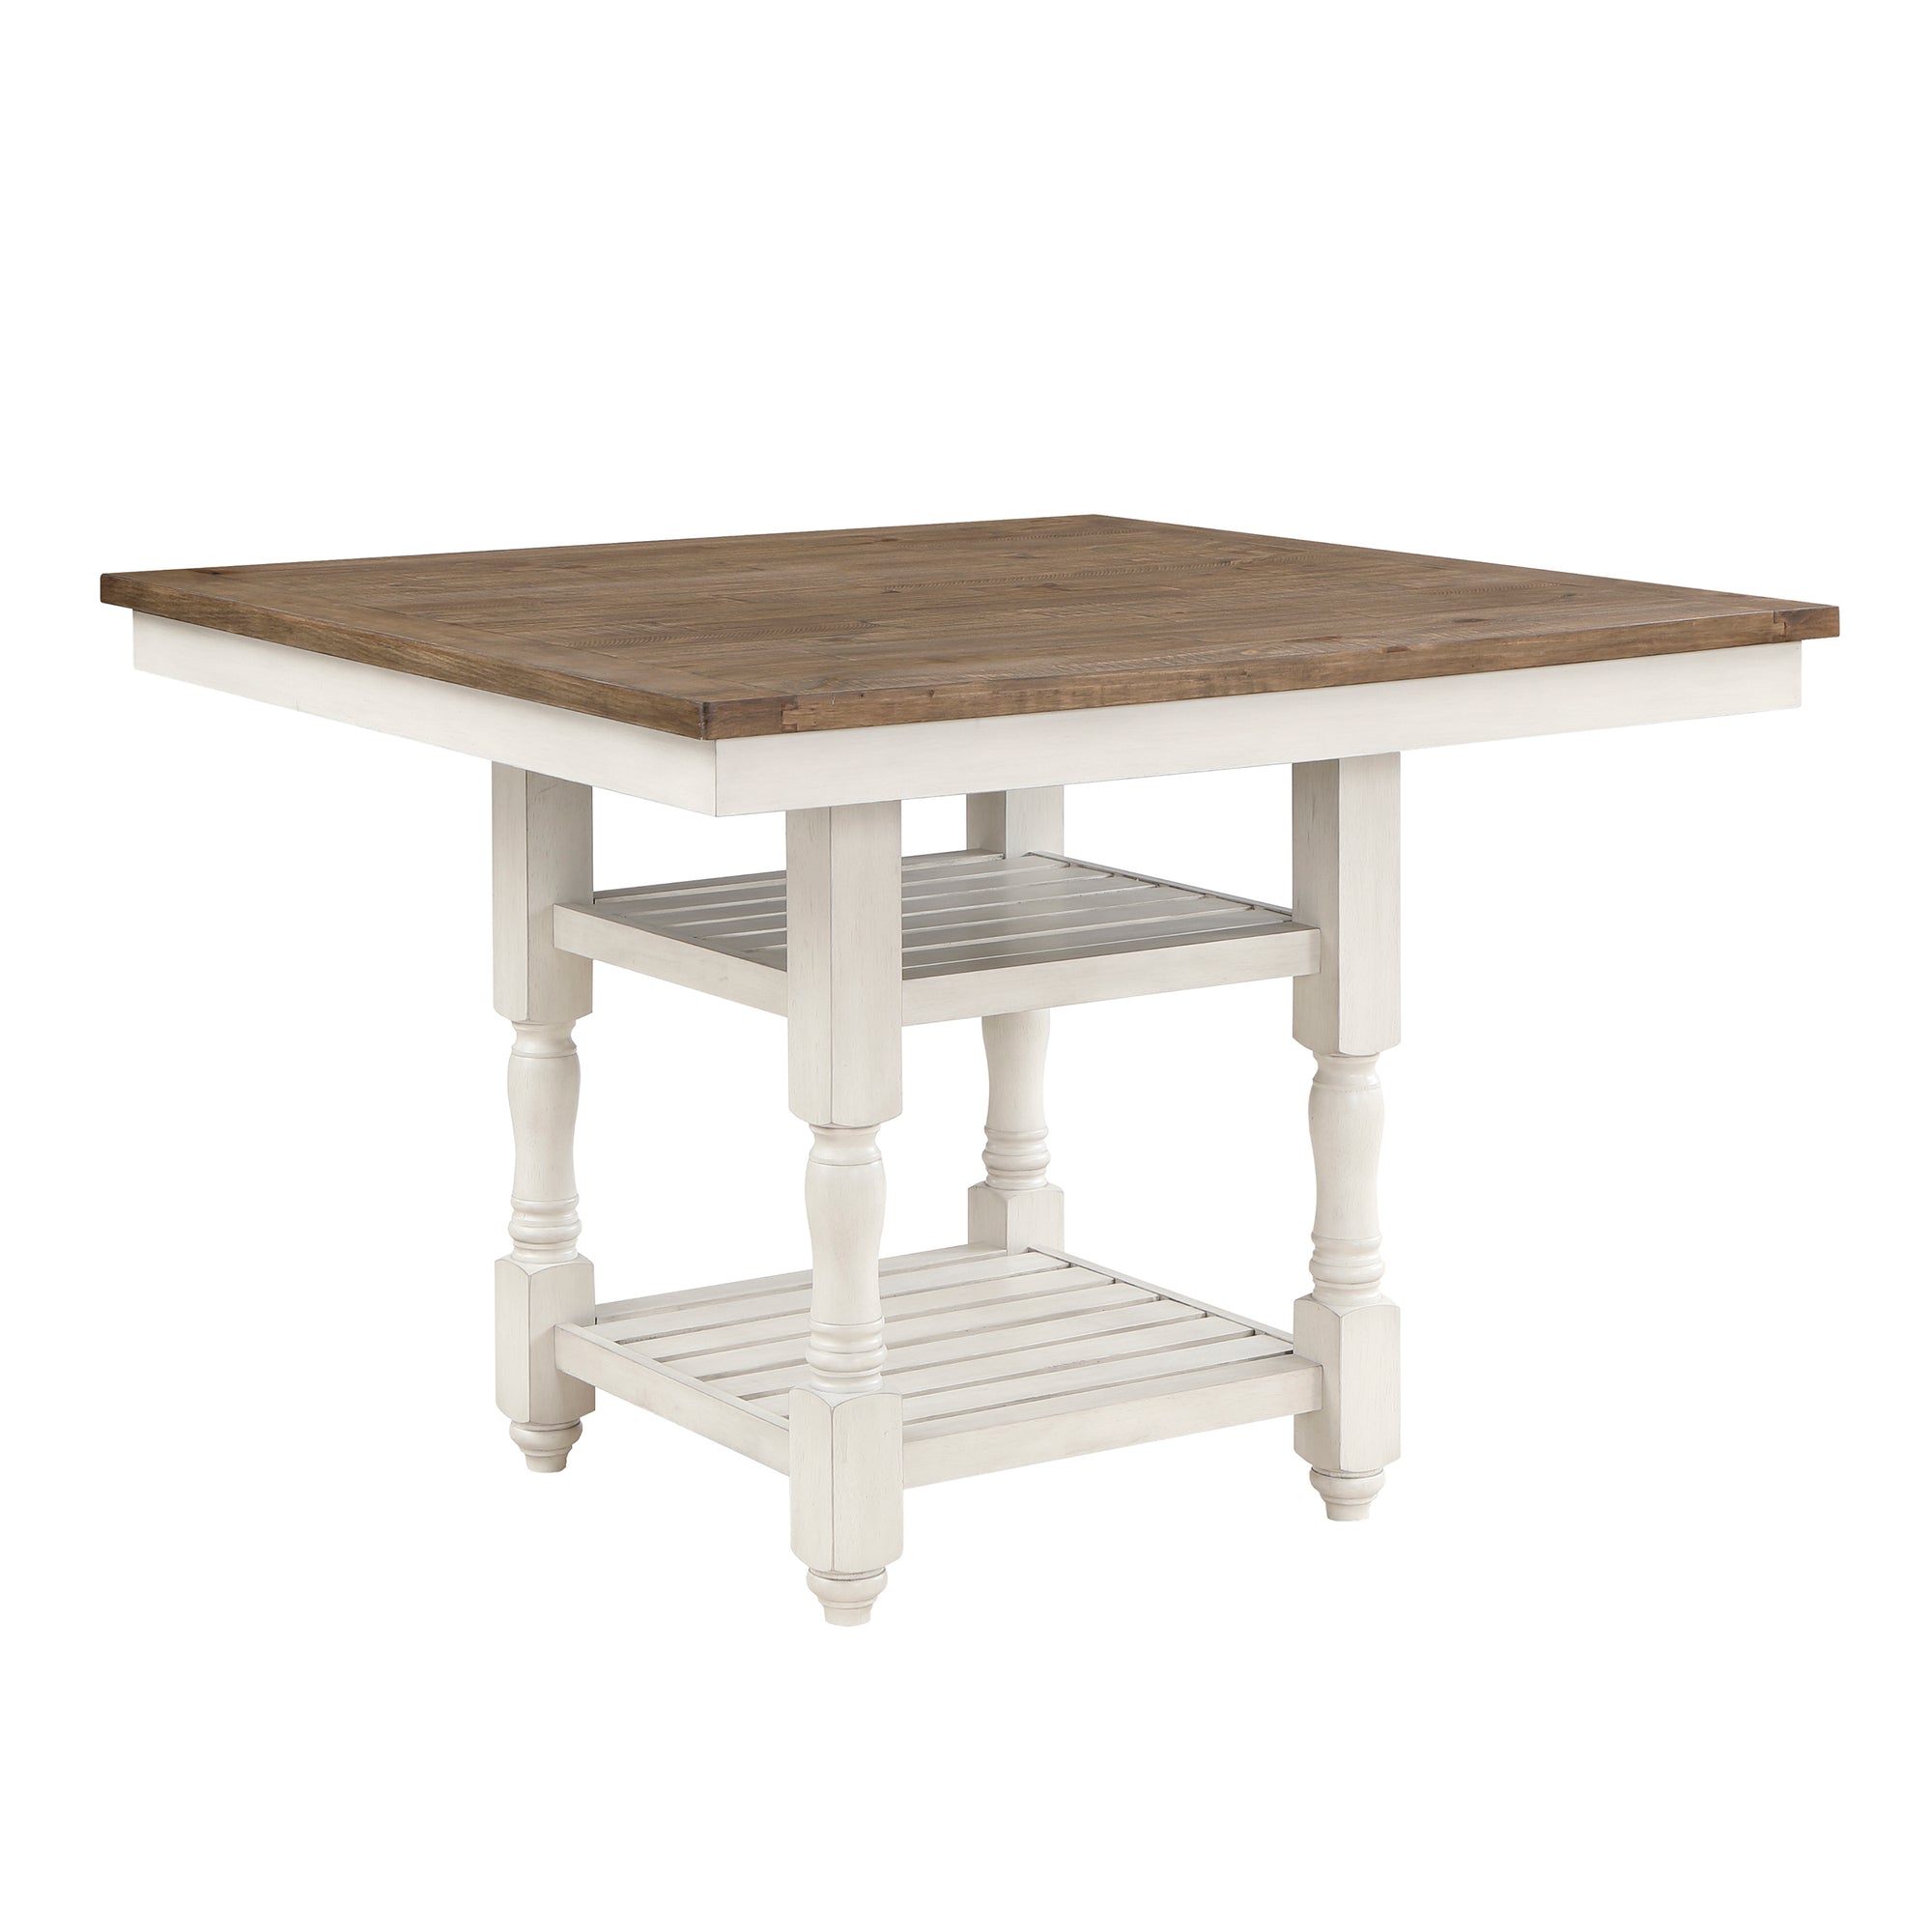 Hadley Counter Height Table